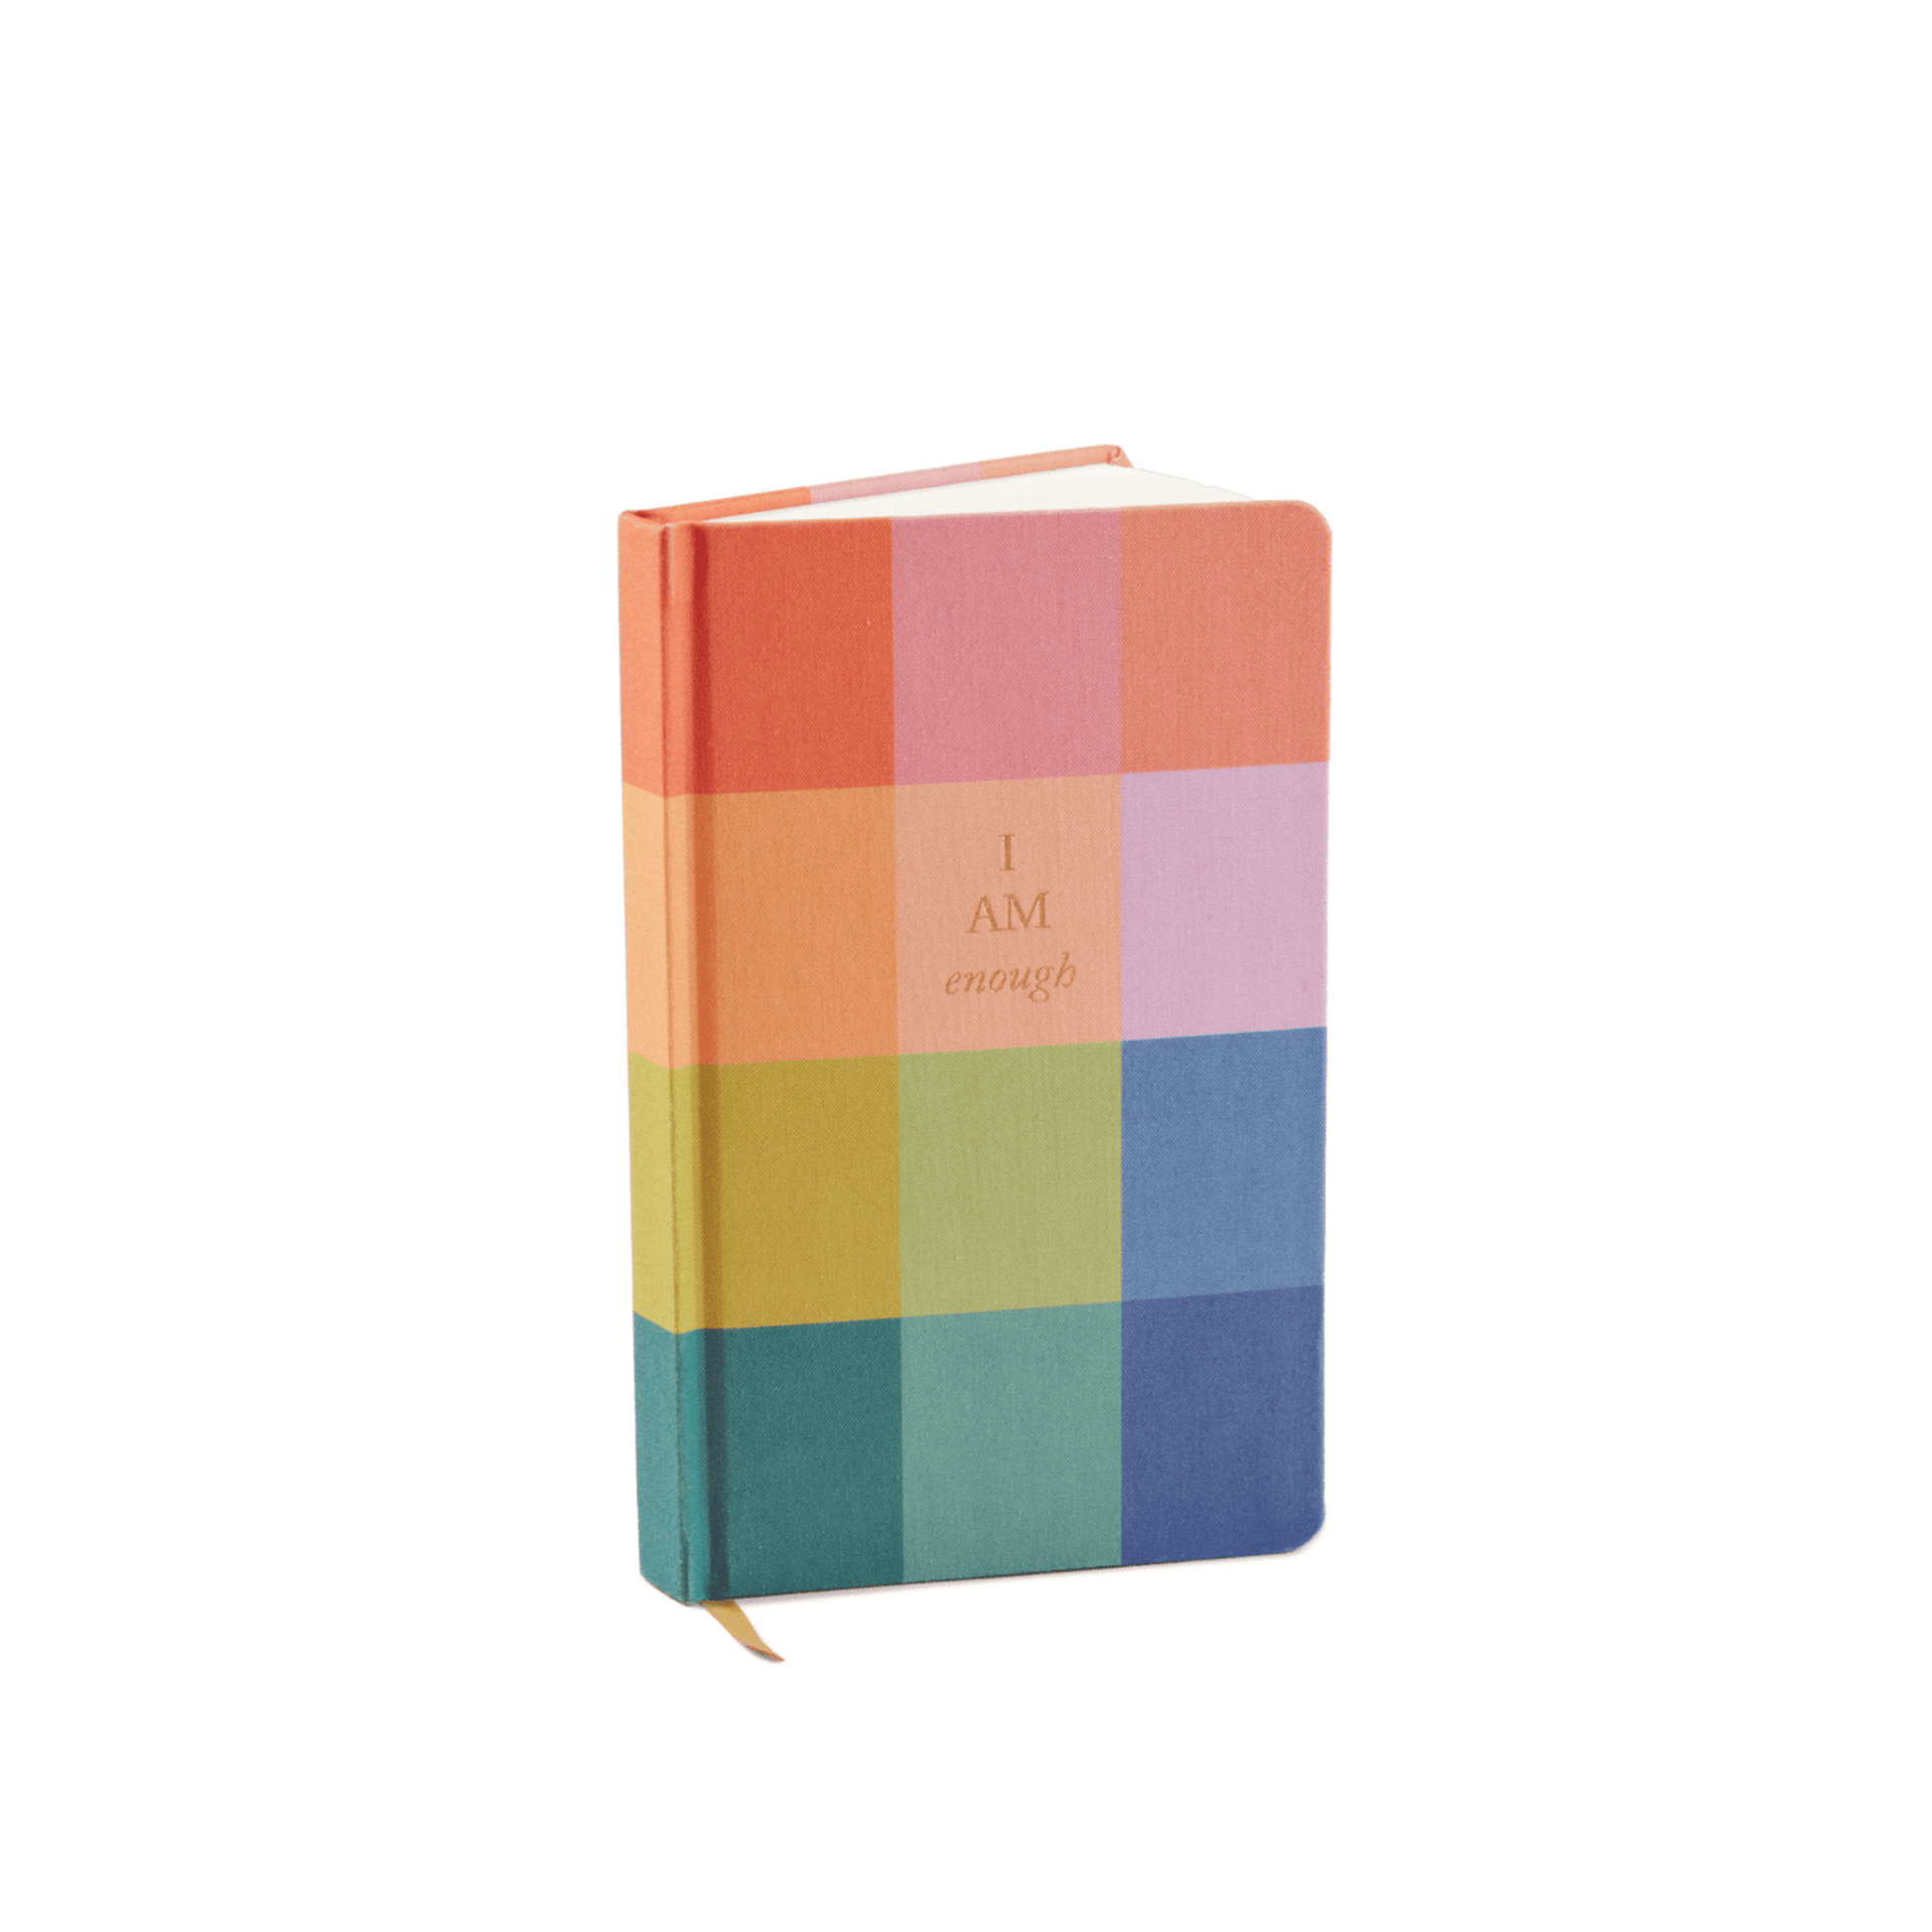 Rainbow checked bookcloth journal with gold foil accent reading I Am Enough on white background